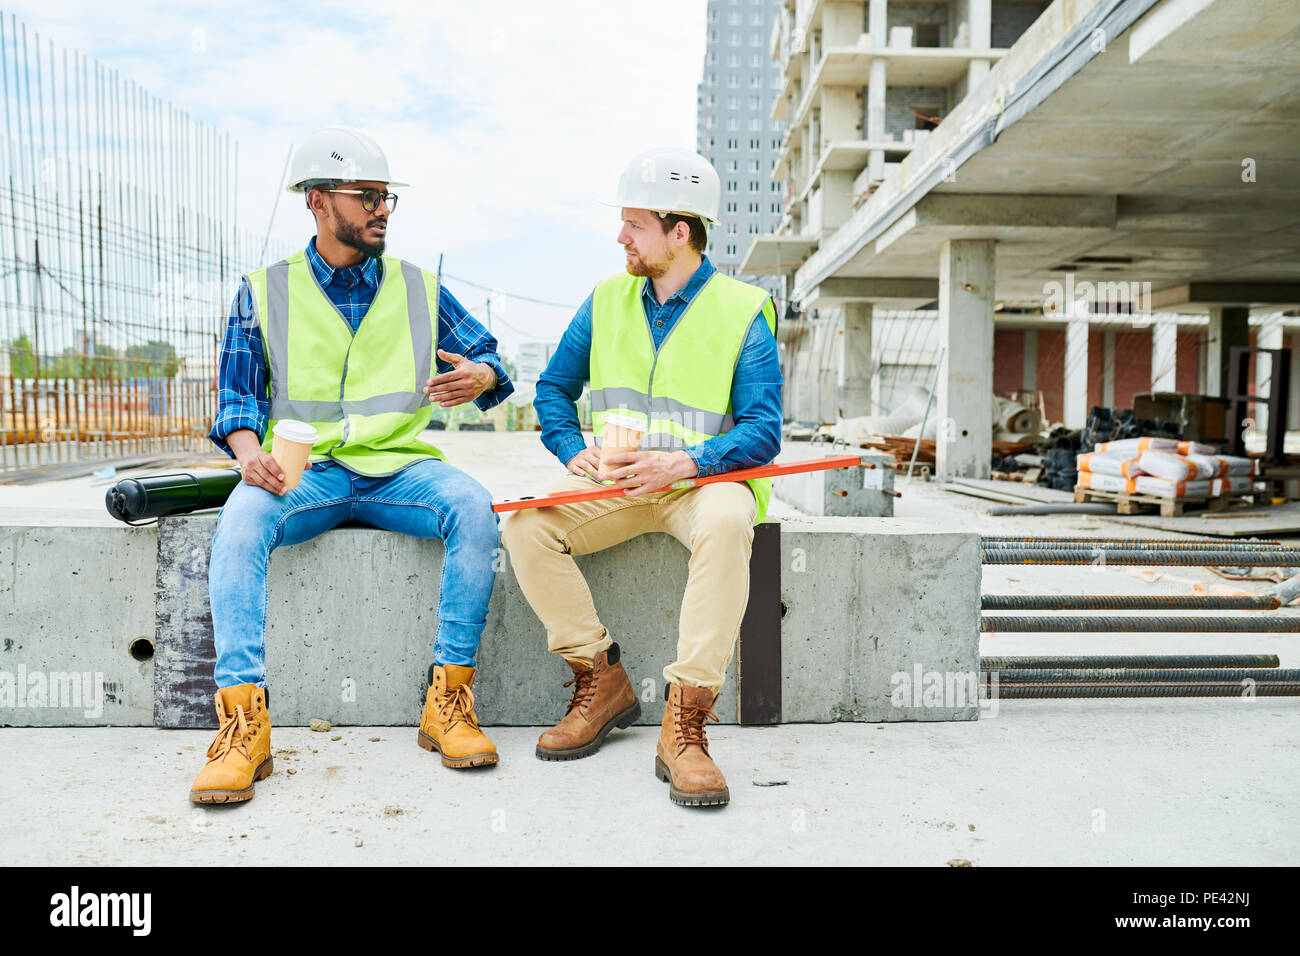 Construction engineer telling story to colleague Stock Photo